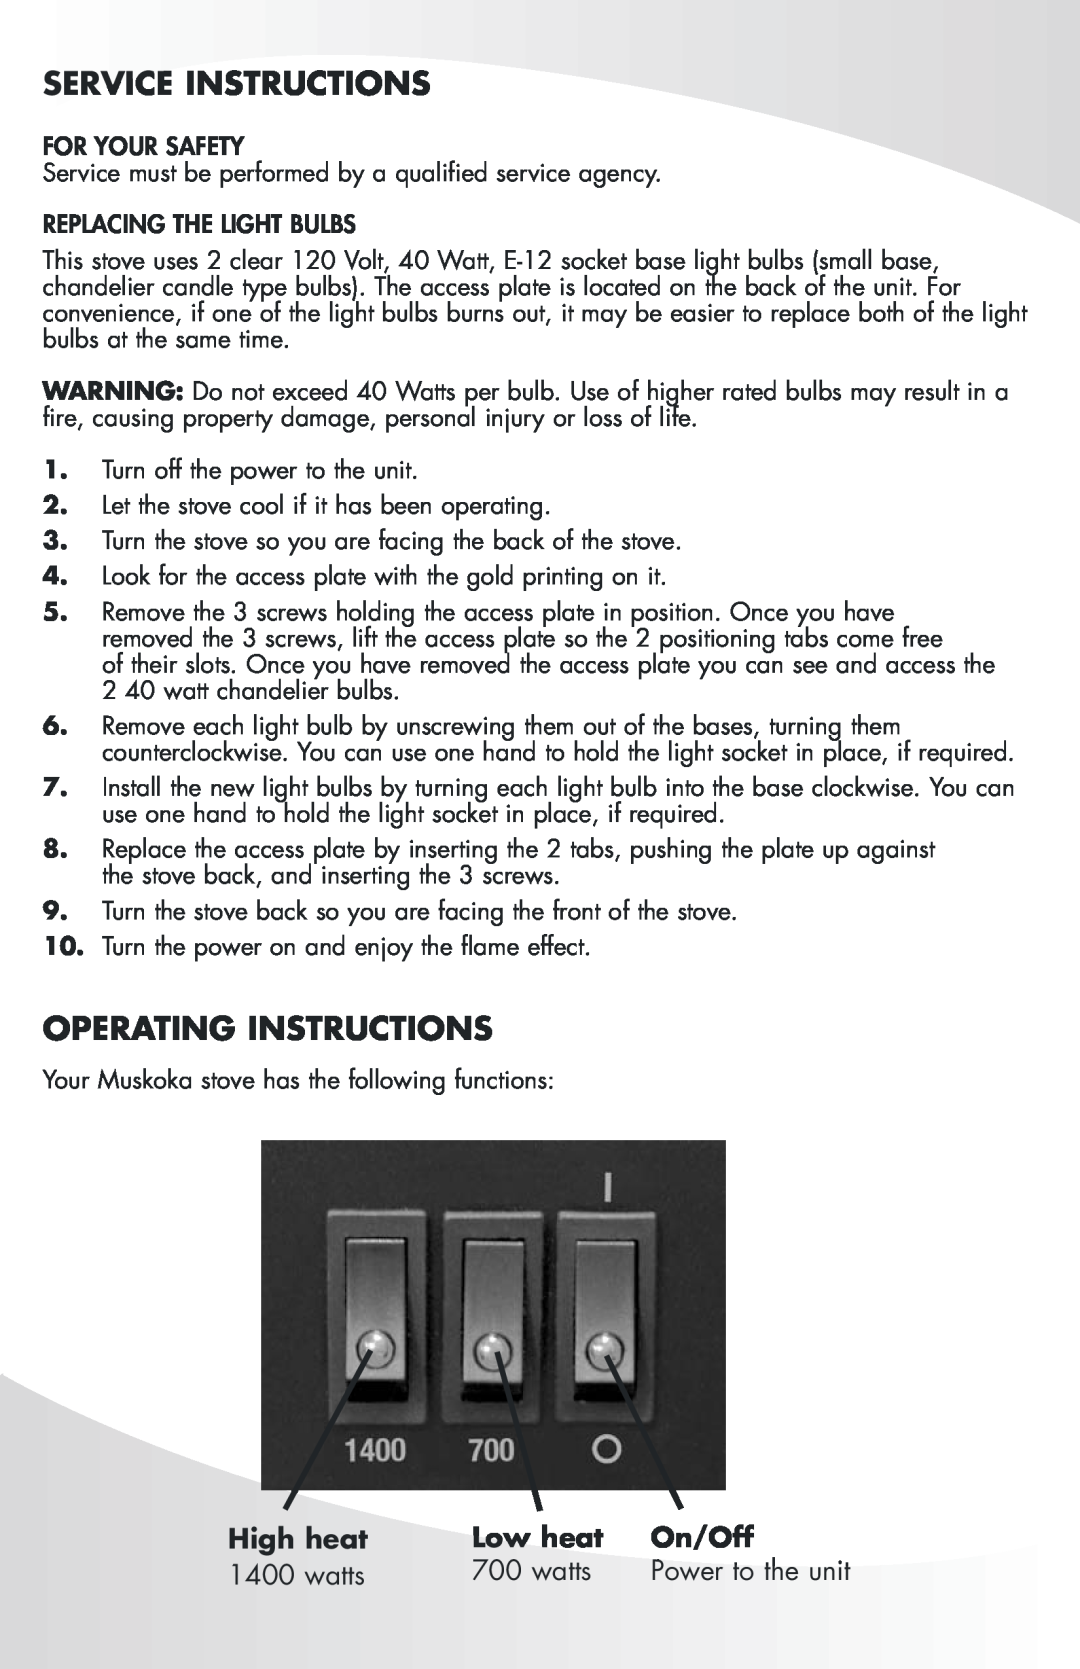 Greenway Home Products MES32BL Service Instructions, Operating Instructions, watts, Power to the unit, High heat, Low heat 